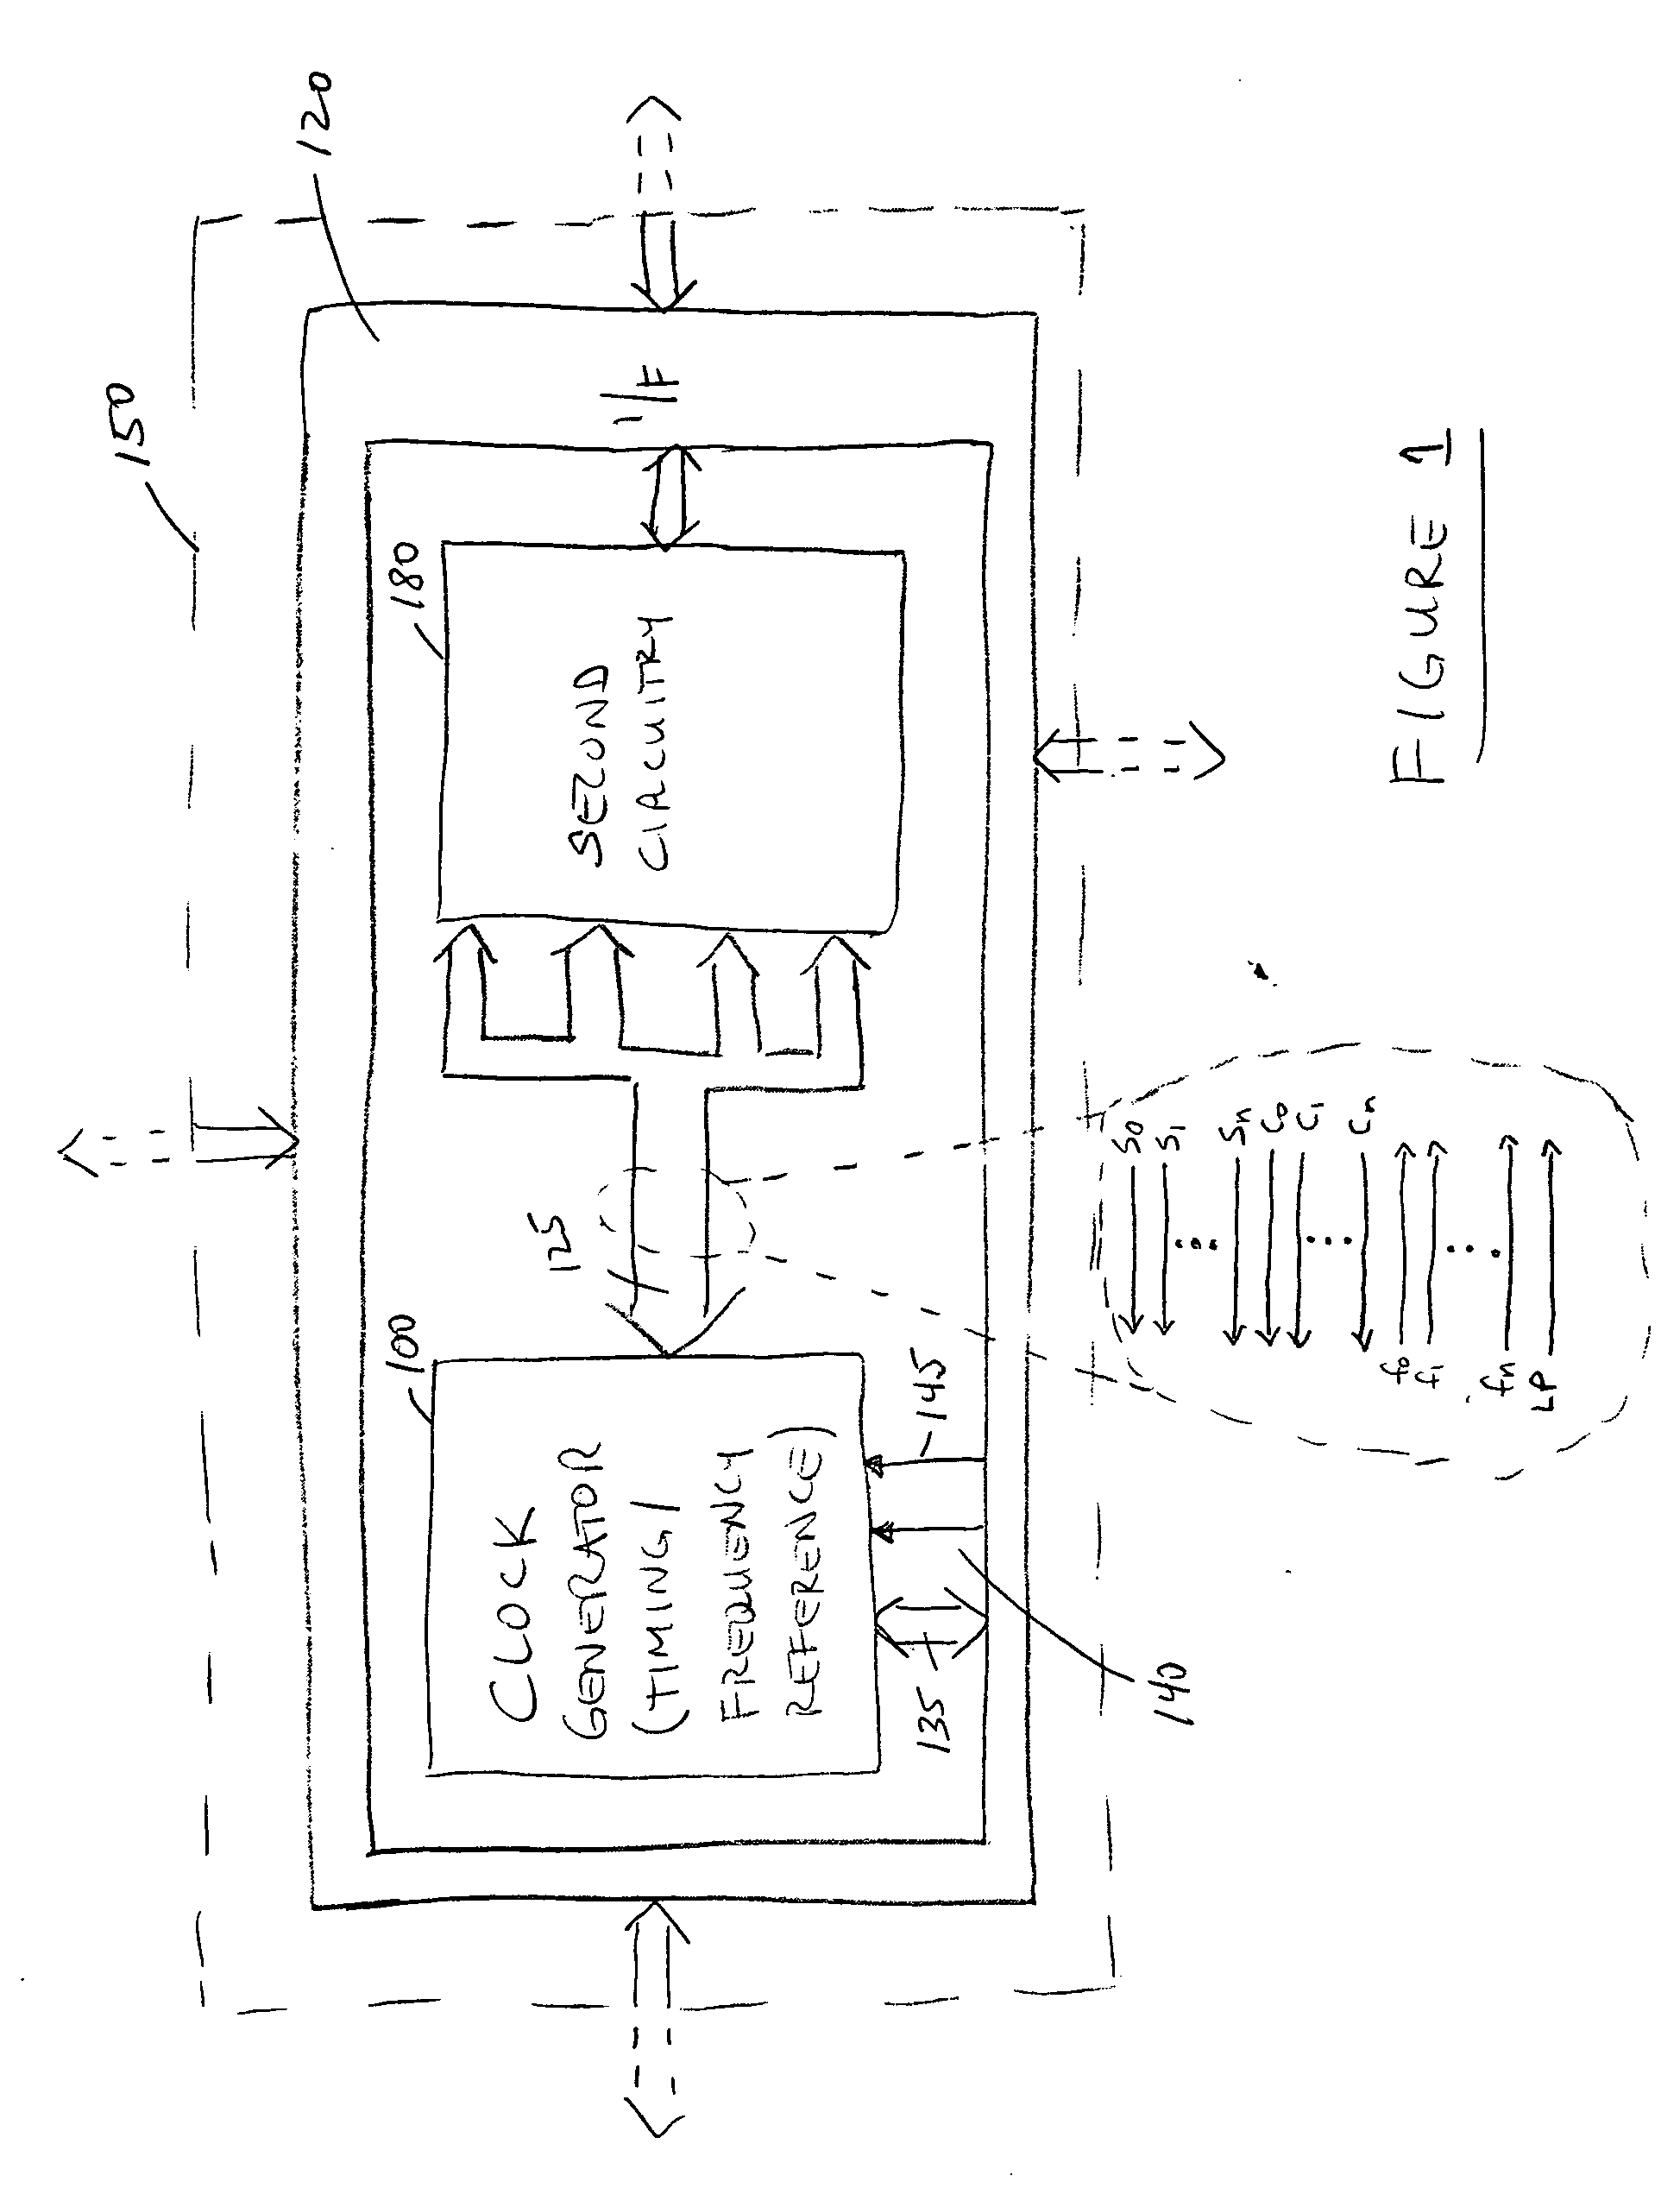 Transconductance and current modulation for resonant frequency control and selection